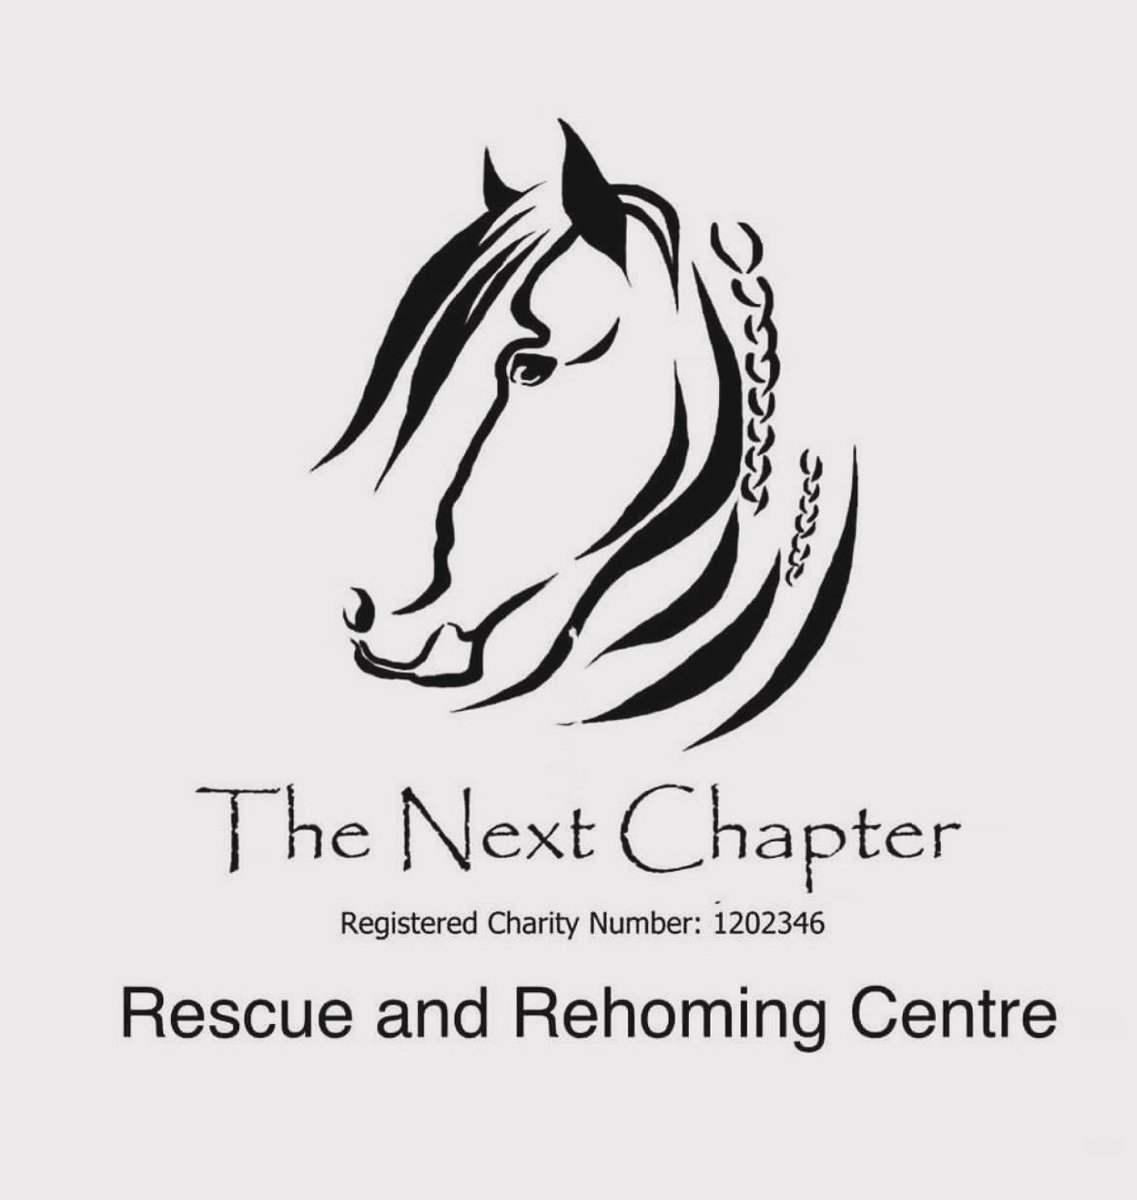 Come meet the team at Manor Farm for Next Chapter Rescue and Rehoming Centre this Saturday 20th April. Why not come along and try our range of gin’s and gin liqueurs #driftwoodgin #fulloffamilyspirit #craftgin#smallbatchdistilling